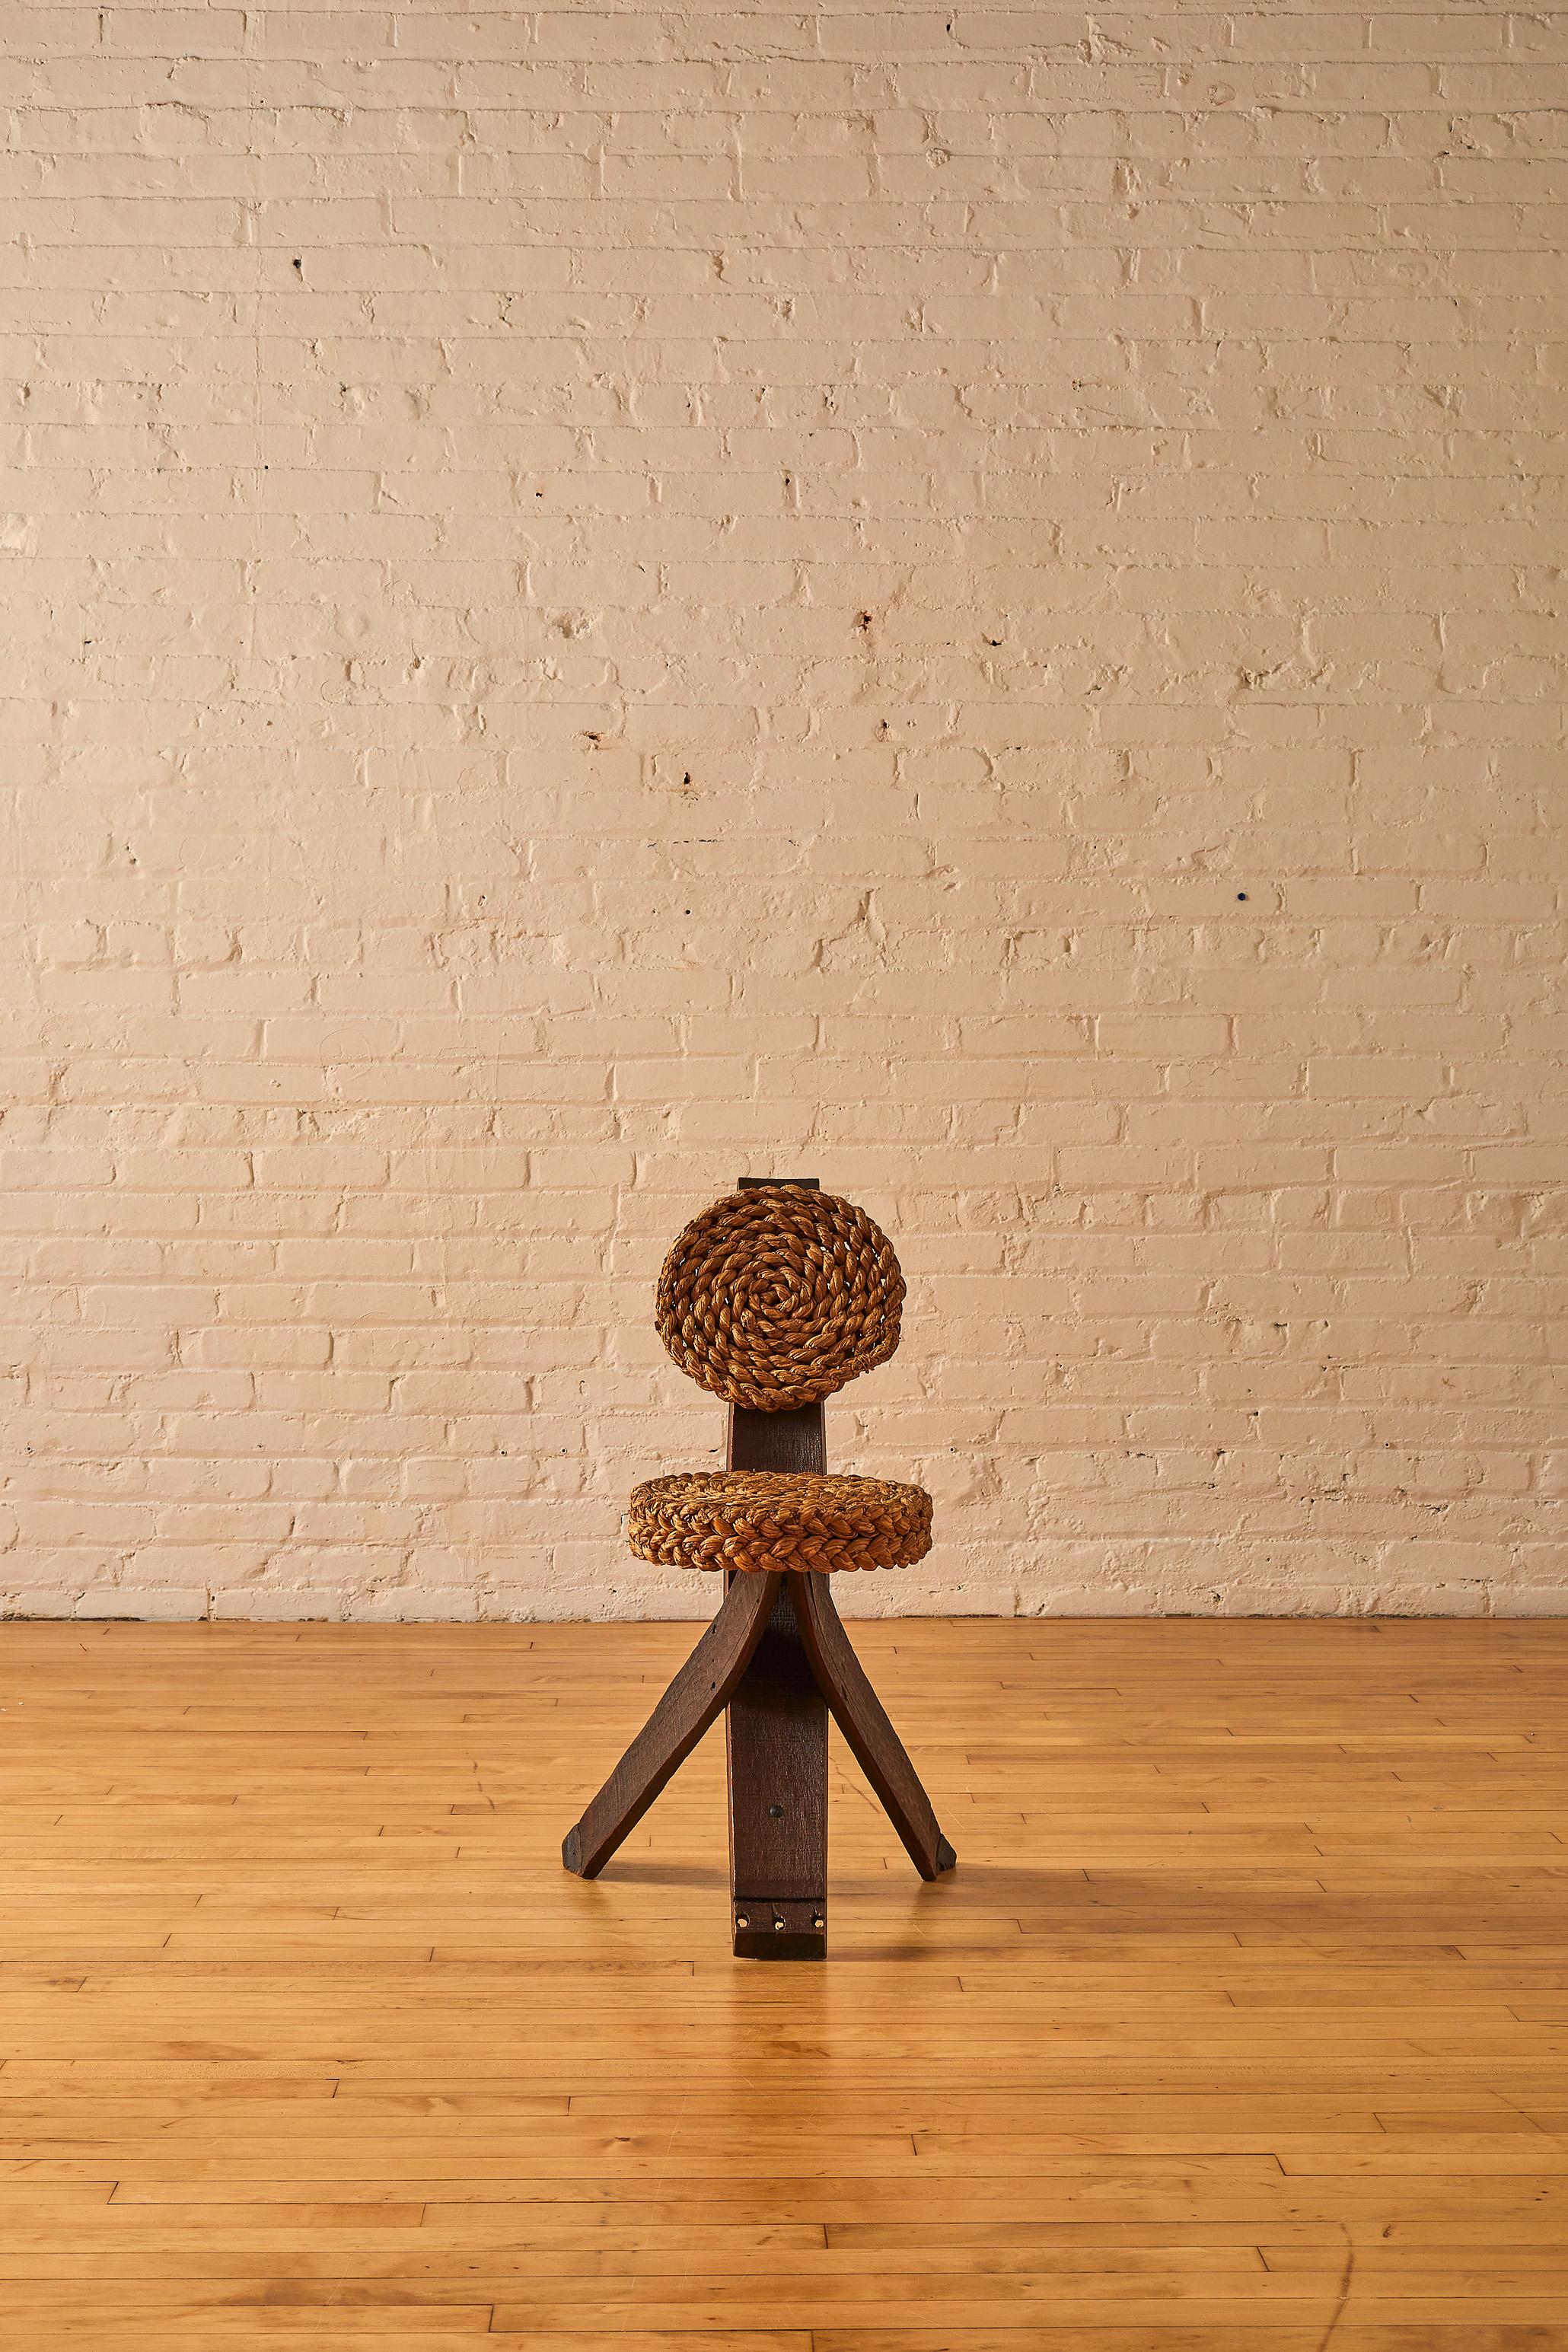 Tripod rope chair by Adrien Audoux & Frida Minet featuring wooden structure.